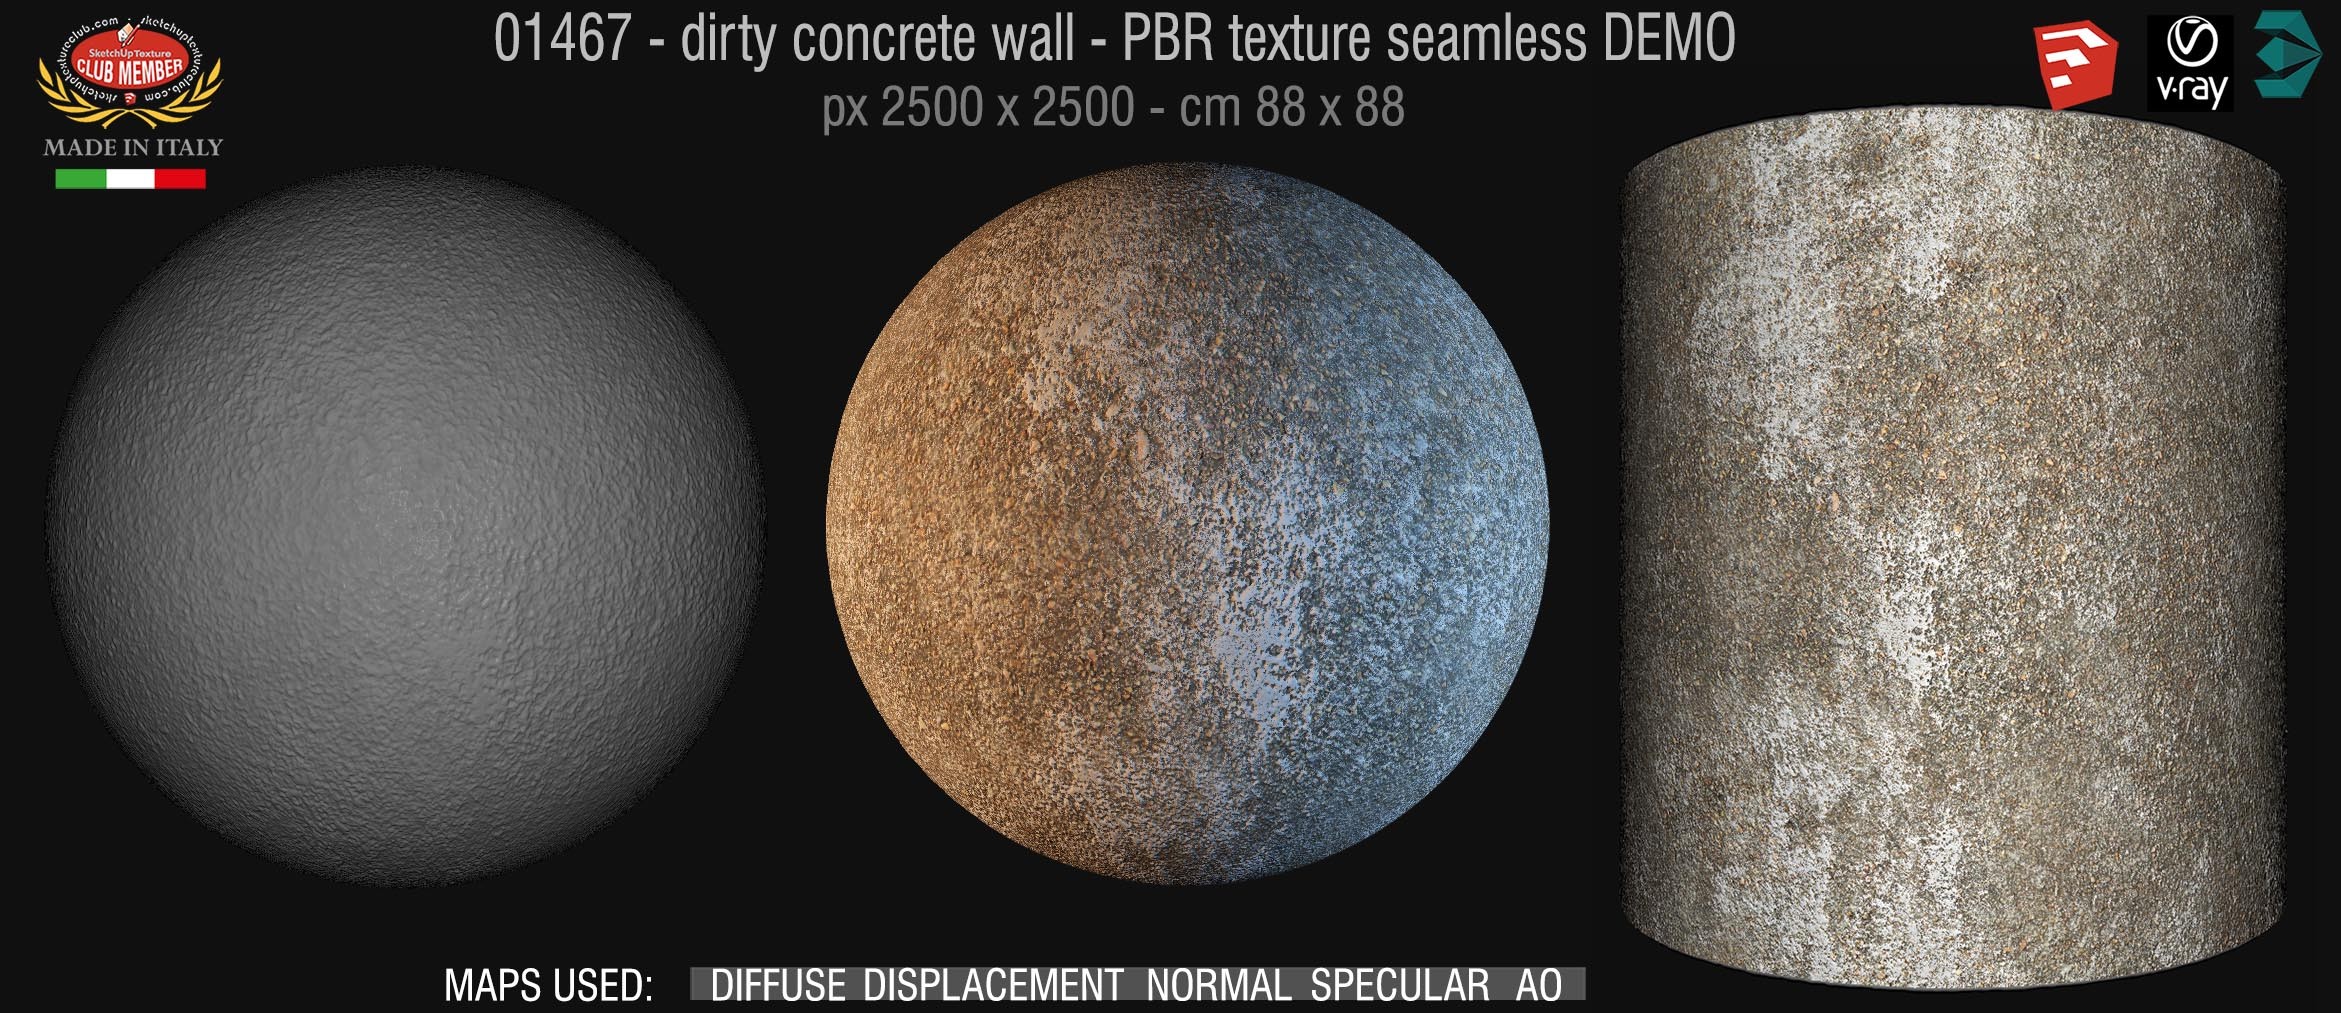 01467 Concrete bare dirty wall PBR texture seamless DEMO